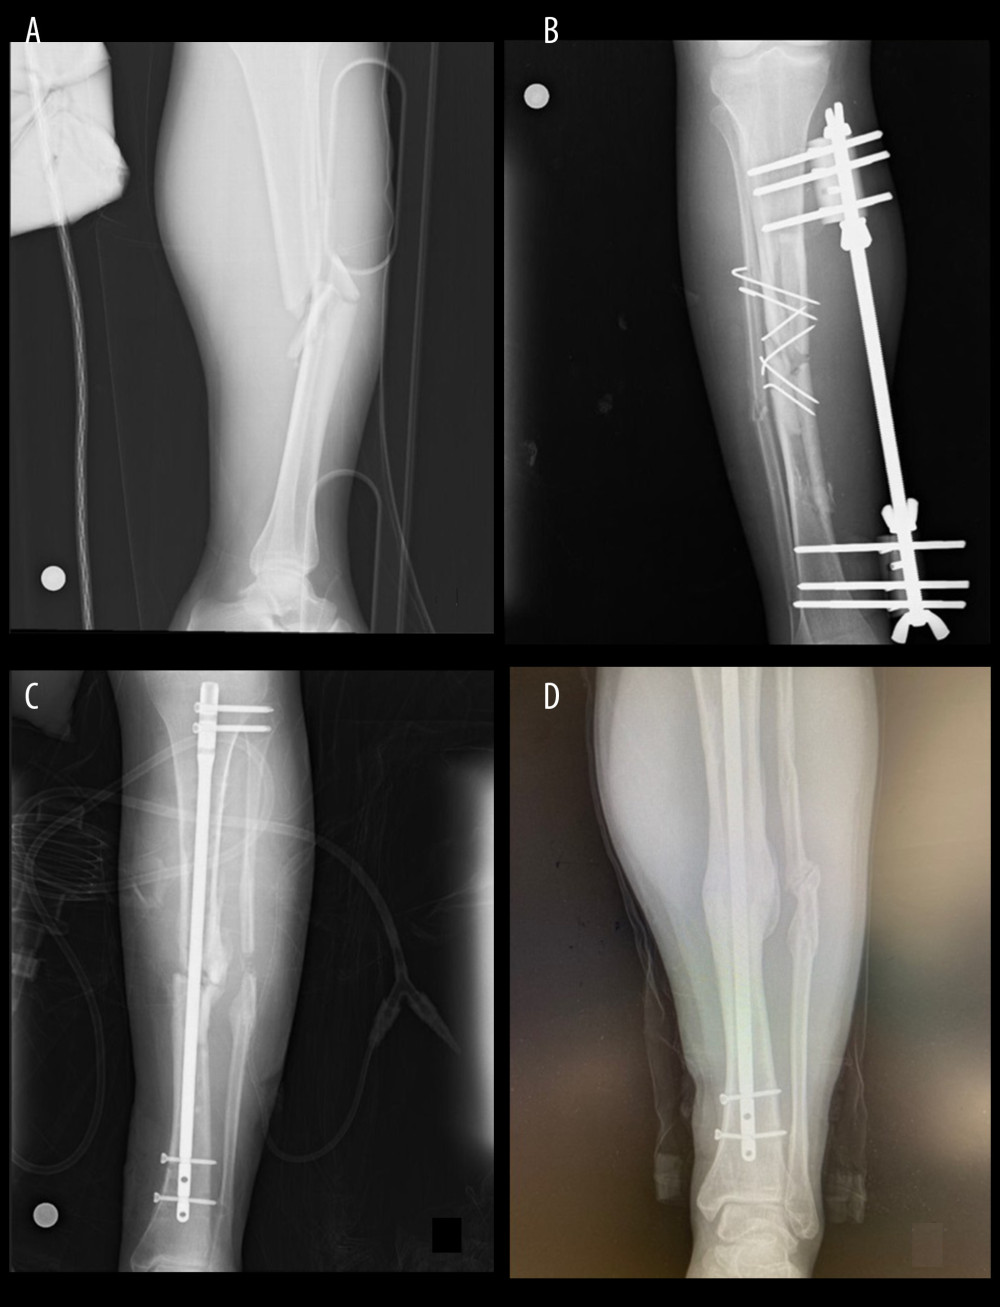 43-year-old male femur fracture A) fracture radiography B) postoperative 11th month radiography C) Decortication – Bone Grafting Method application postoperative radiograph D) postoperative 14th month after decortication – Bone Grafting application radiograph.